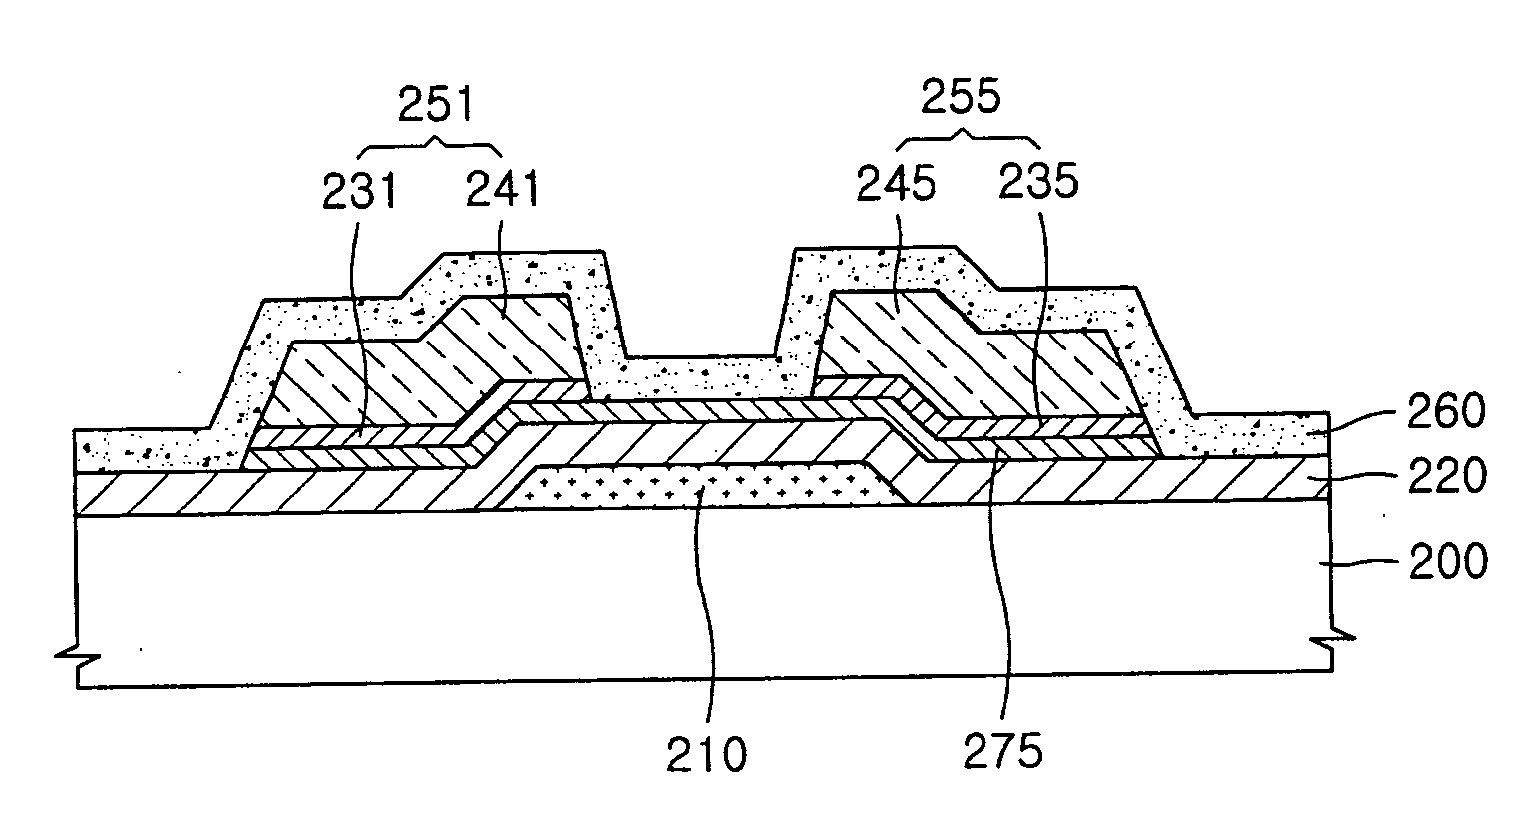 Thin film transistor and method of fabricating the same